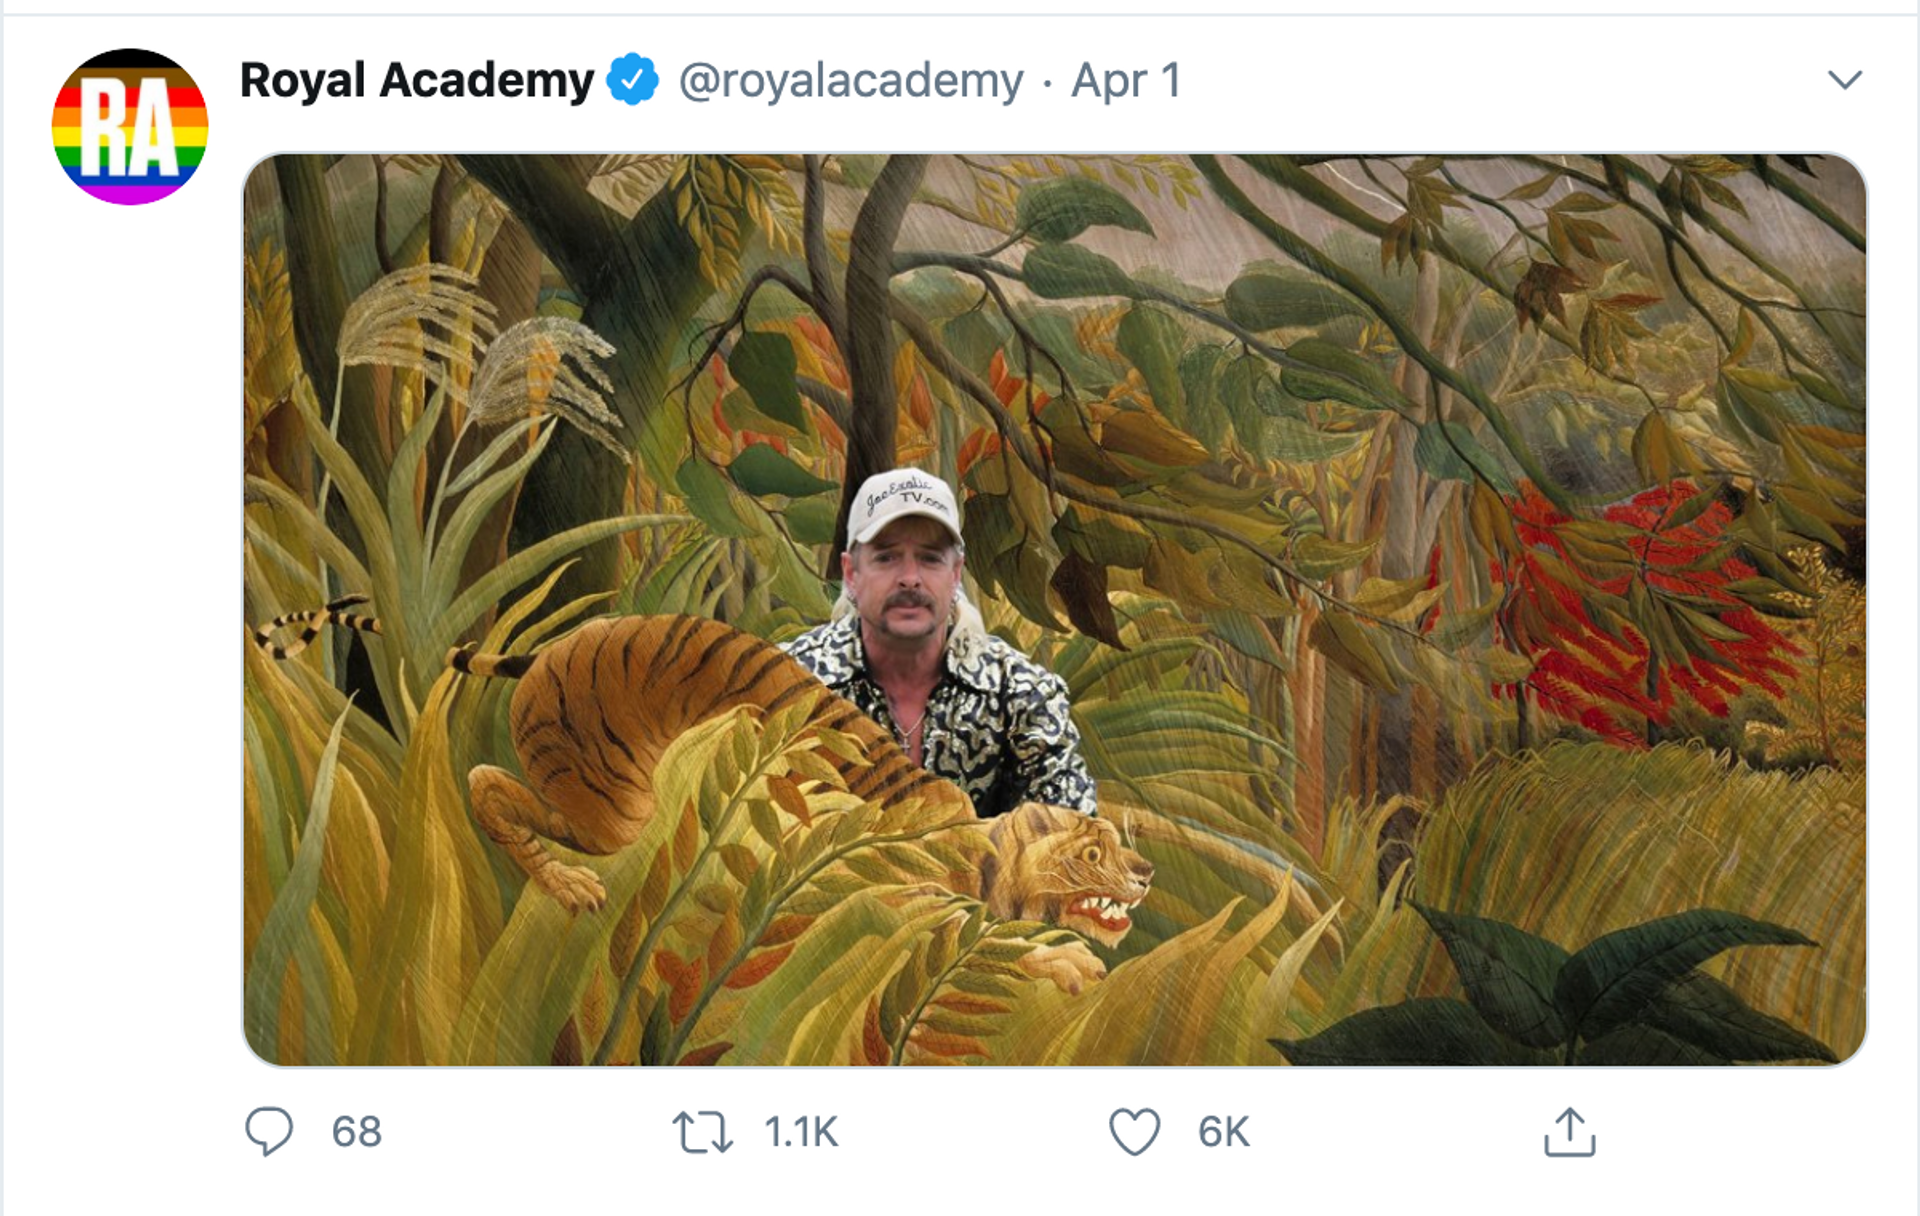 A screenshot of the Royal Academy's tweet where they sent out a meme of the zookeeper Joe Exotic—from the popular Netflix show Tiger King—photoshopped into Henri Rousseau's painting Tiger in a Tropical Storm (1891) 